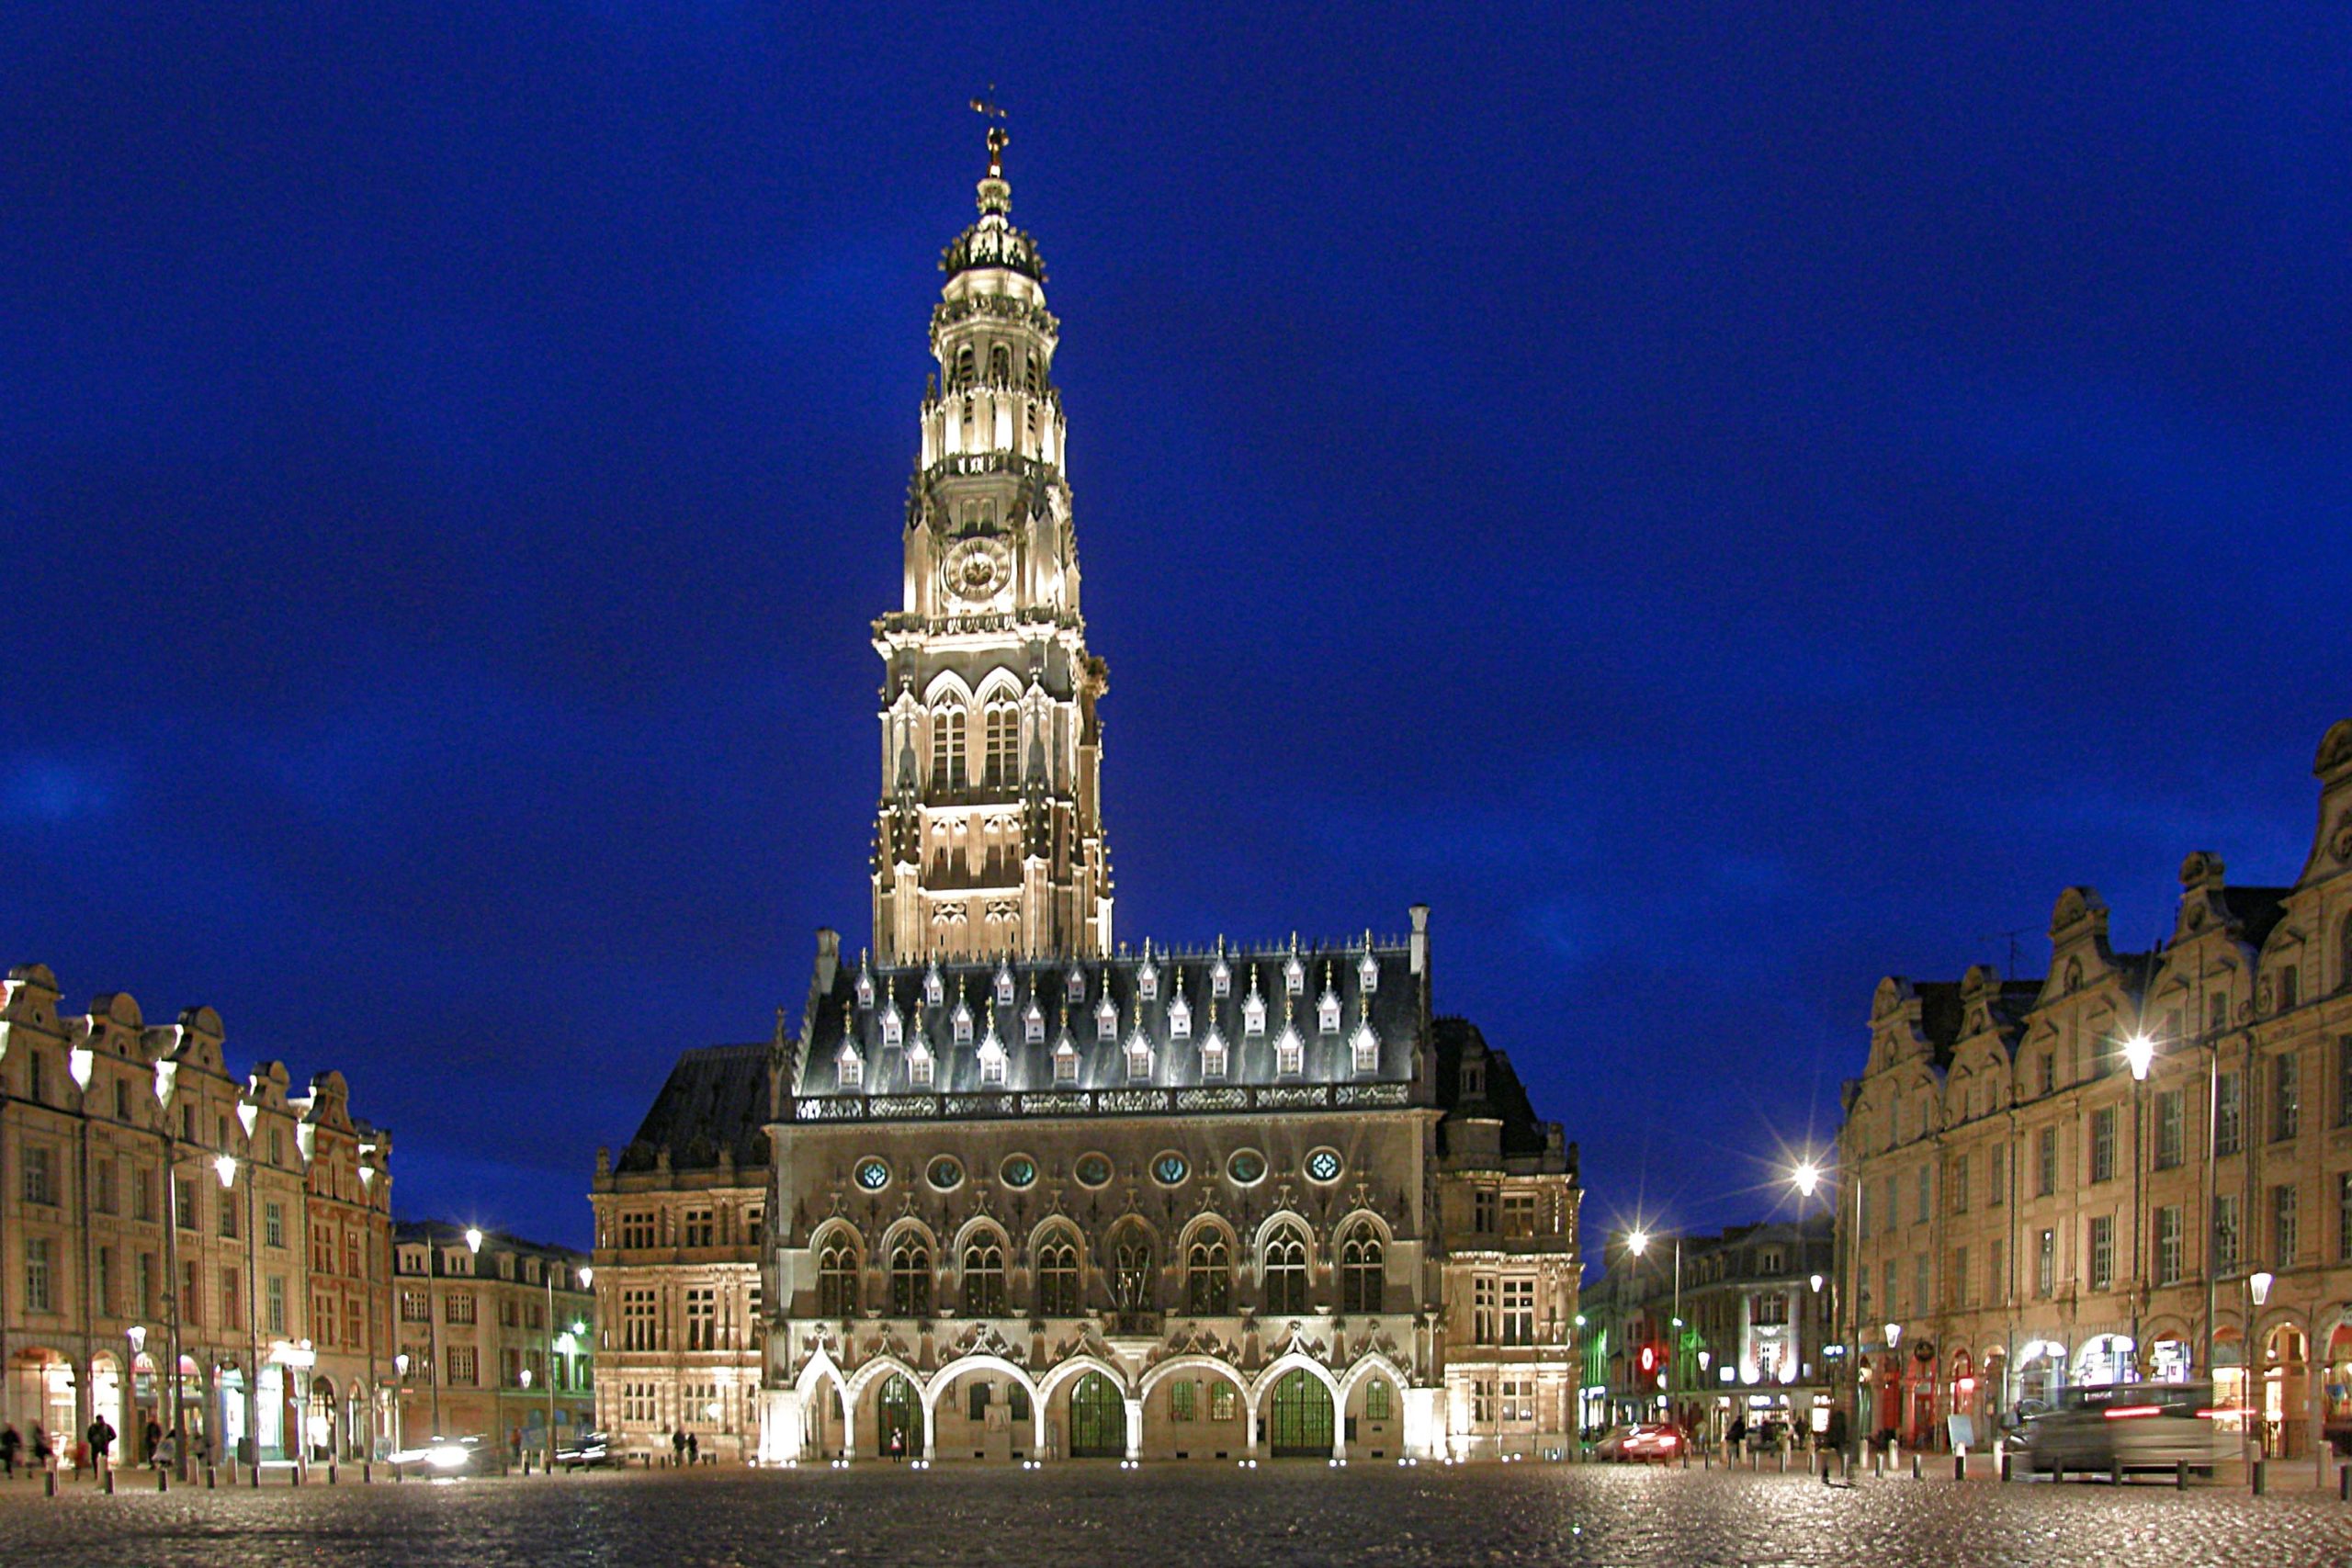 Arras Belfry © Marc Ryckaert - licence [CC BY-SA 4.0] from Wikimedia Commons